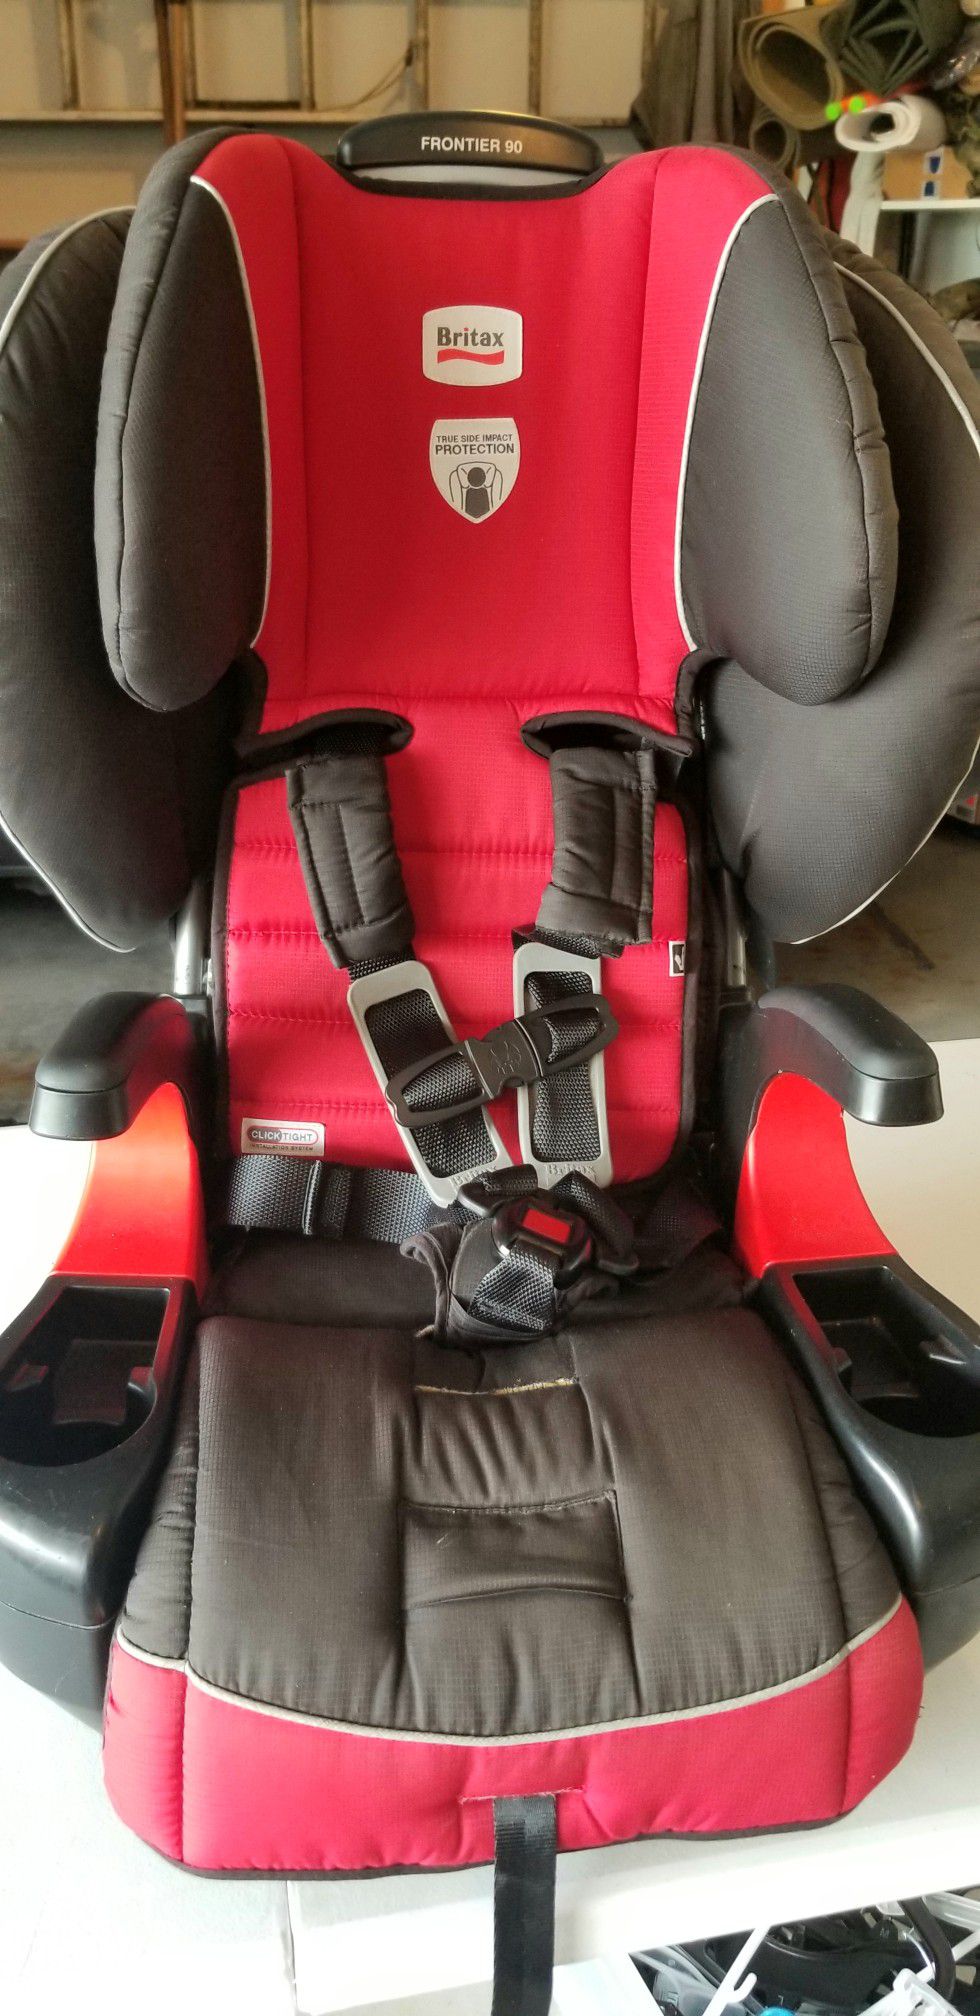 Britax Frontier 90 car seat booster seat